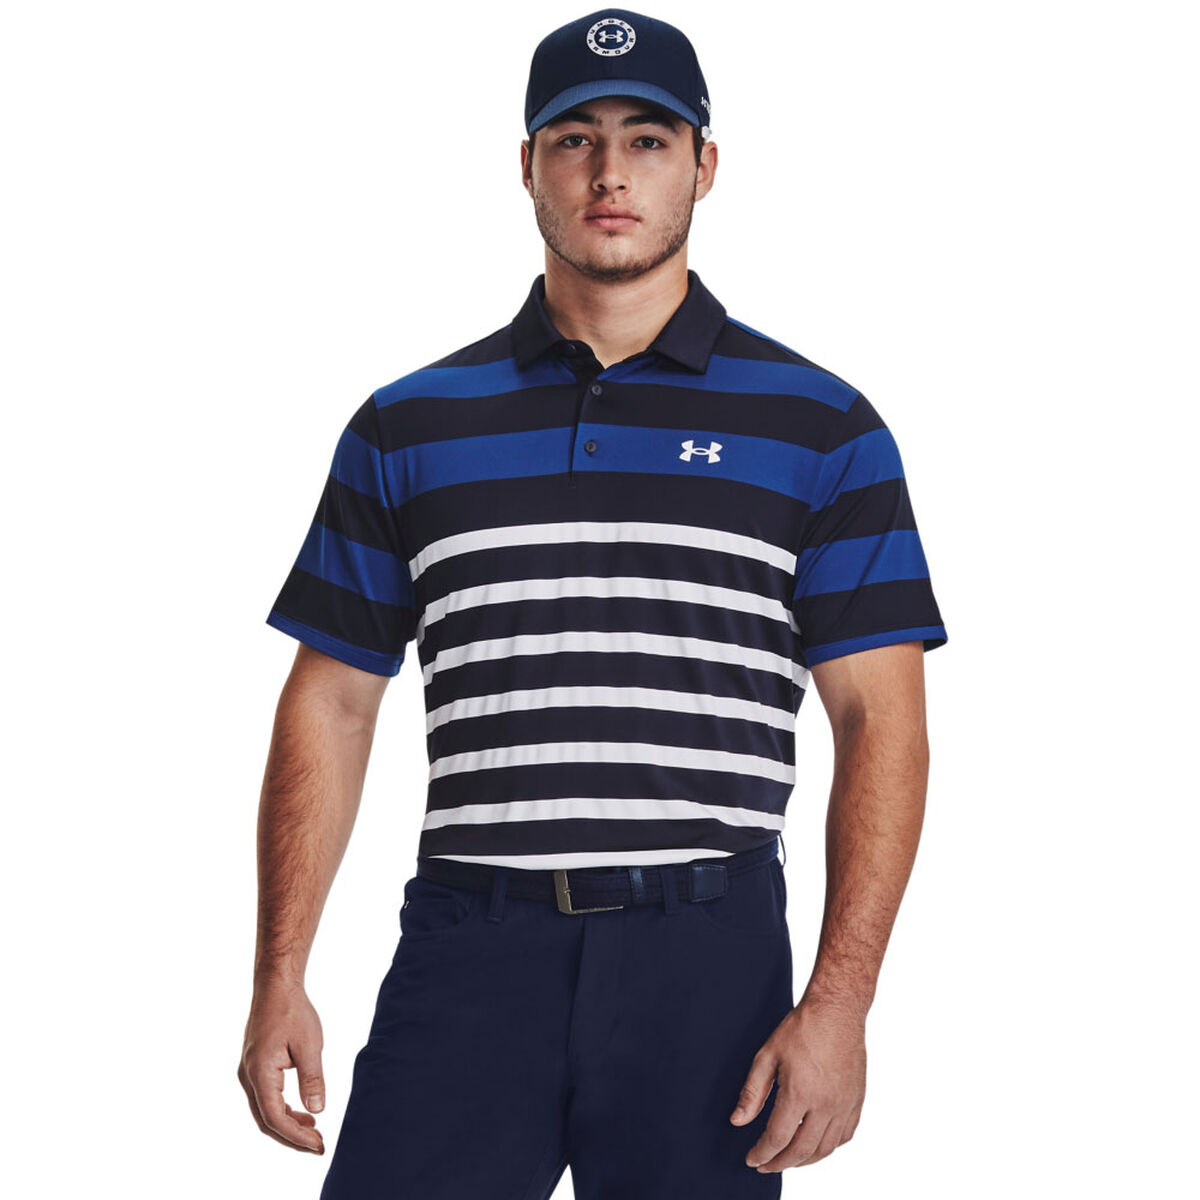 Under Armour Men's Navy Blue and White Playoff 3.0 Rugby YD Stripe Golf Polo Shirt, Size: Large | American Golf von Under Armour